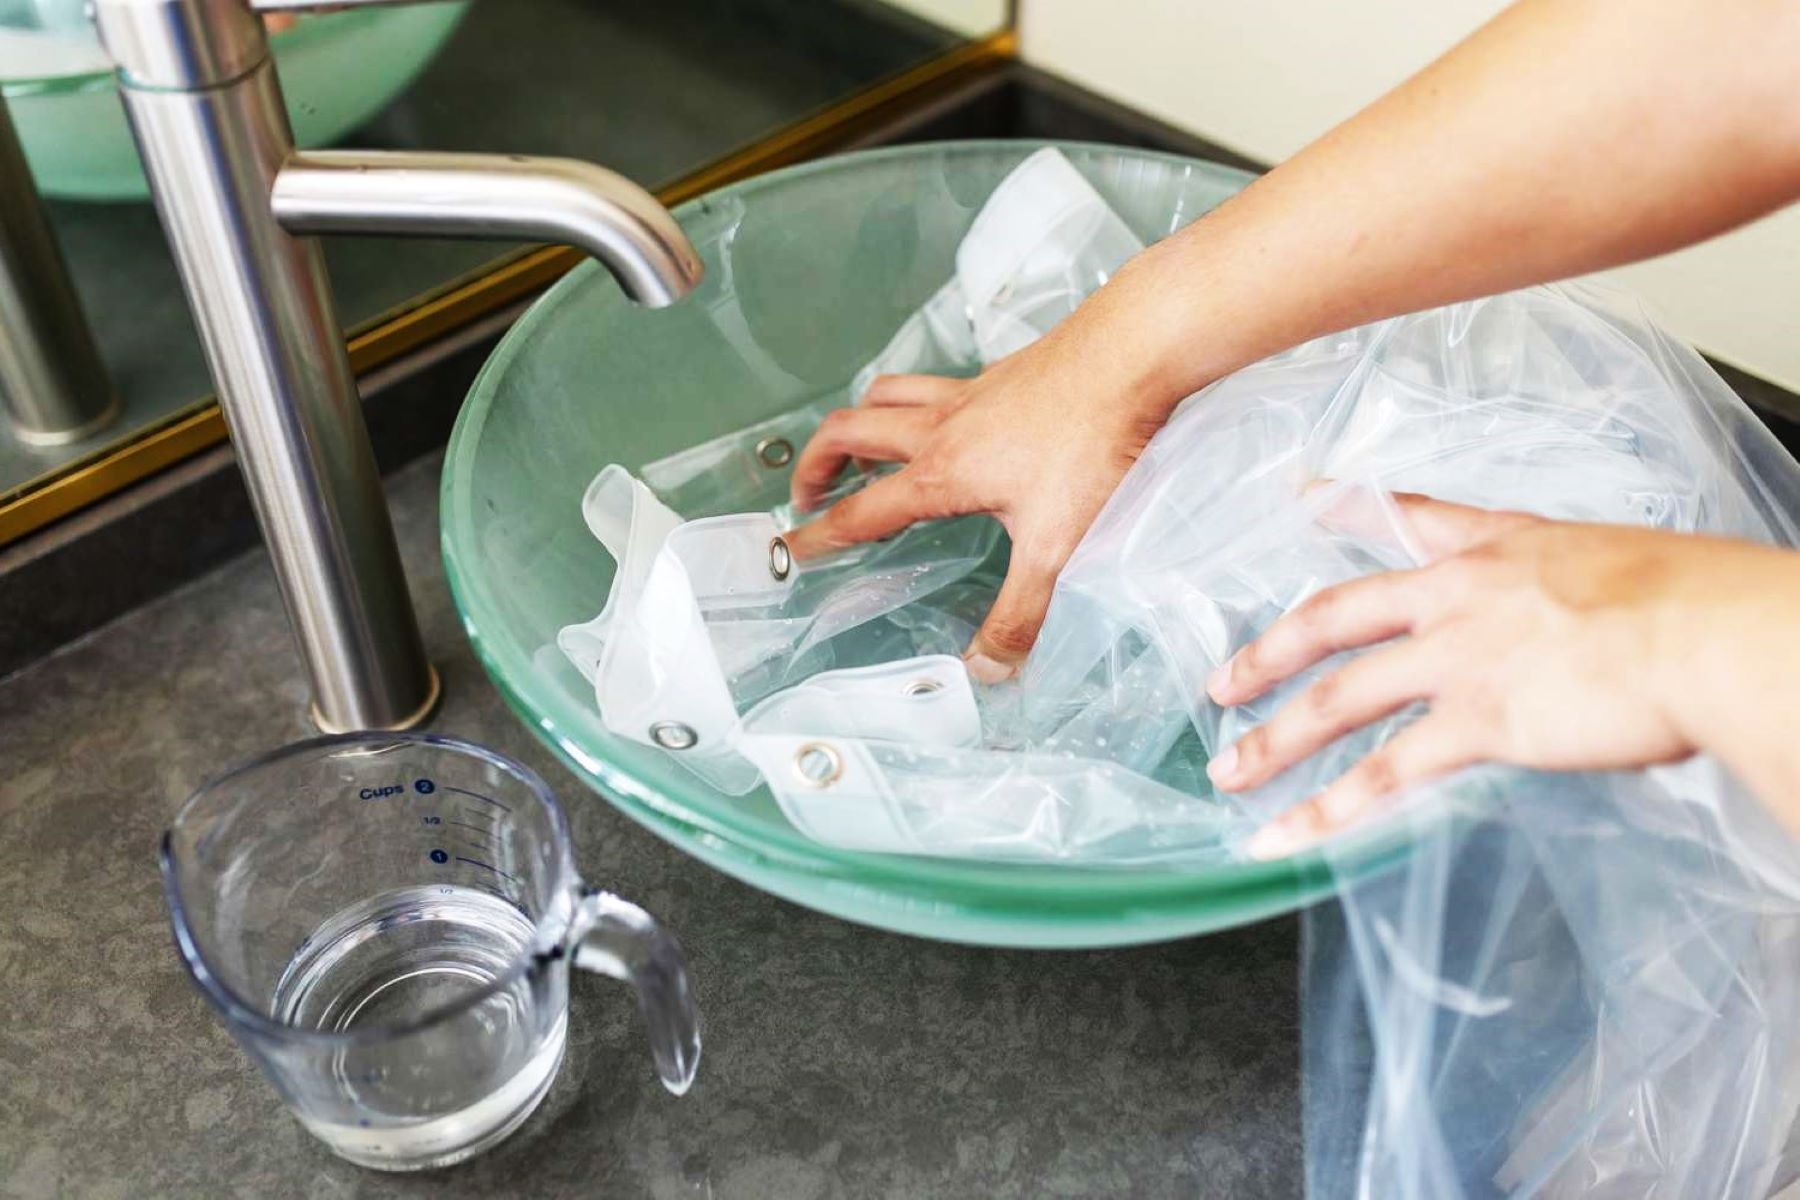 How To Clean A Plastic Shower Curtain Liner Without A Washing Machine